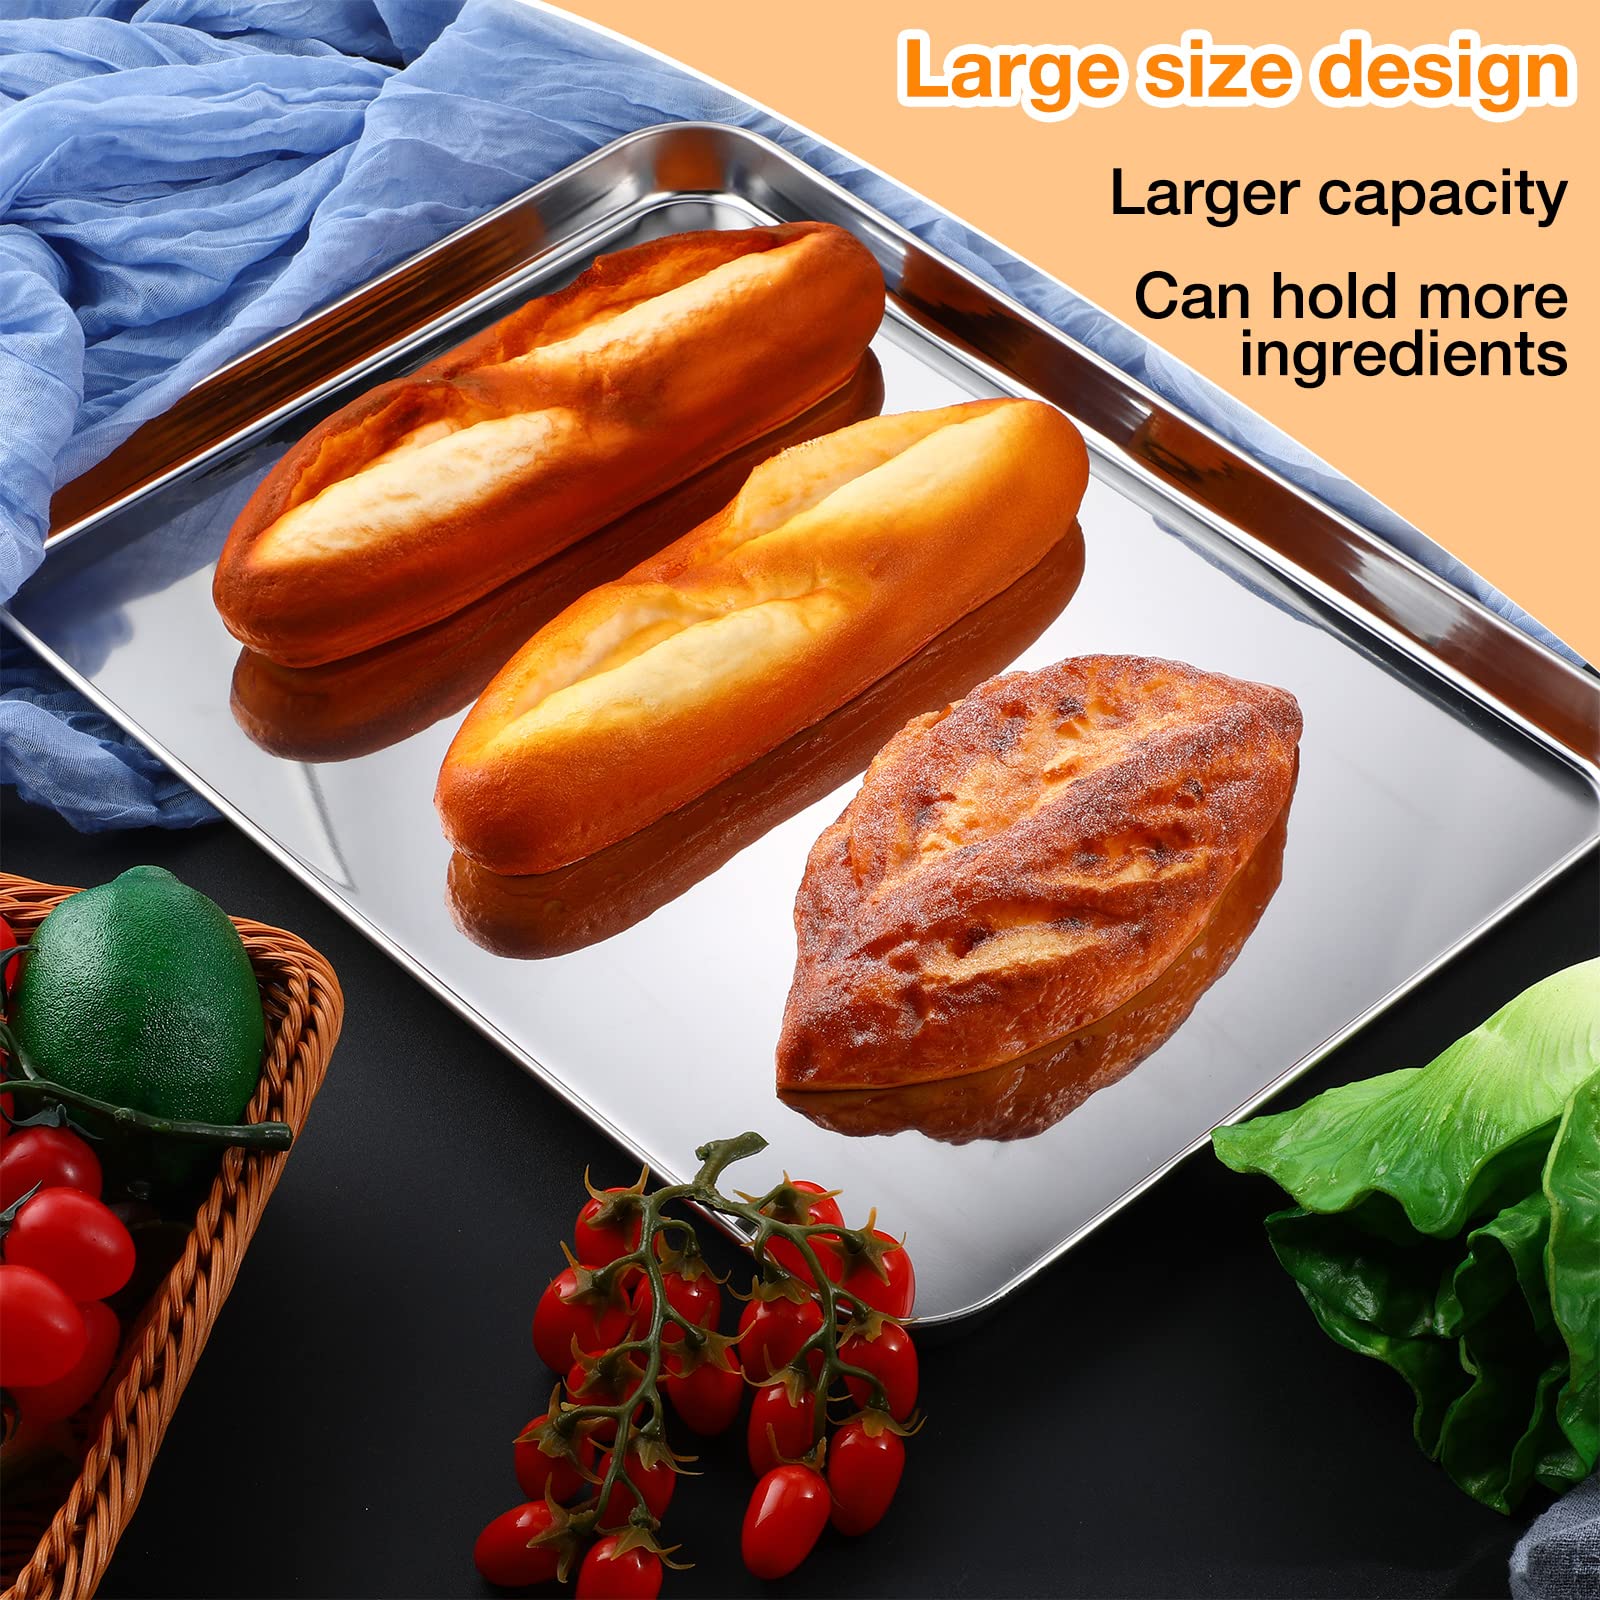 6 Pcs Baking Sheet Set Stainless Steel Cookie Sheet 18 x 13 Inch Cookie Baking Pan Bakeware Oven Tray Dishwasher Safe Baking Tray Commercial Grade Baking Sheets for Oven Baking, Silver